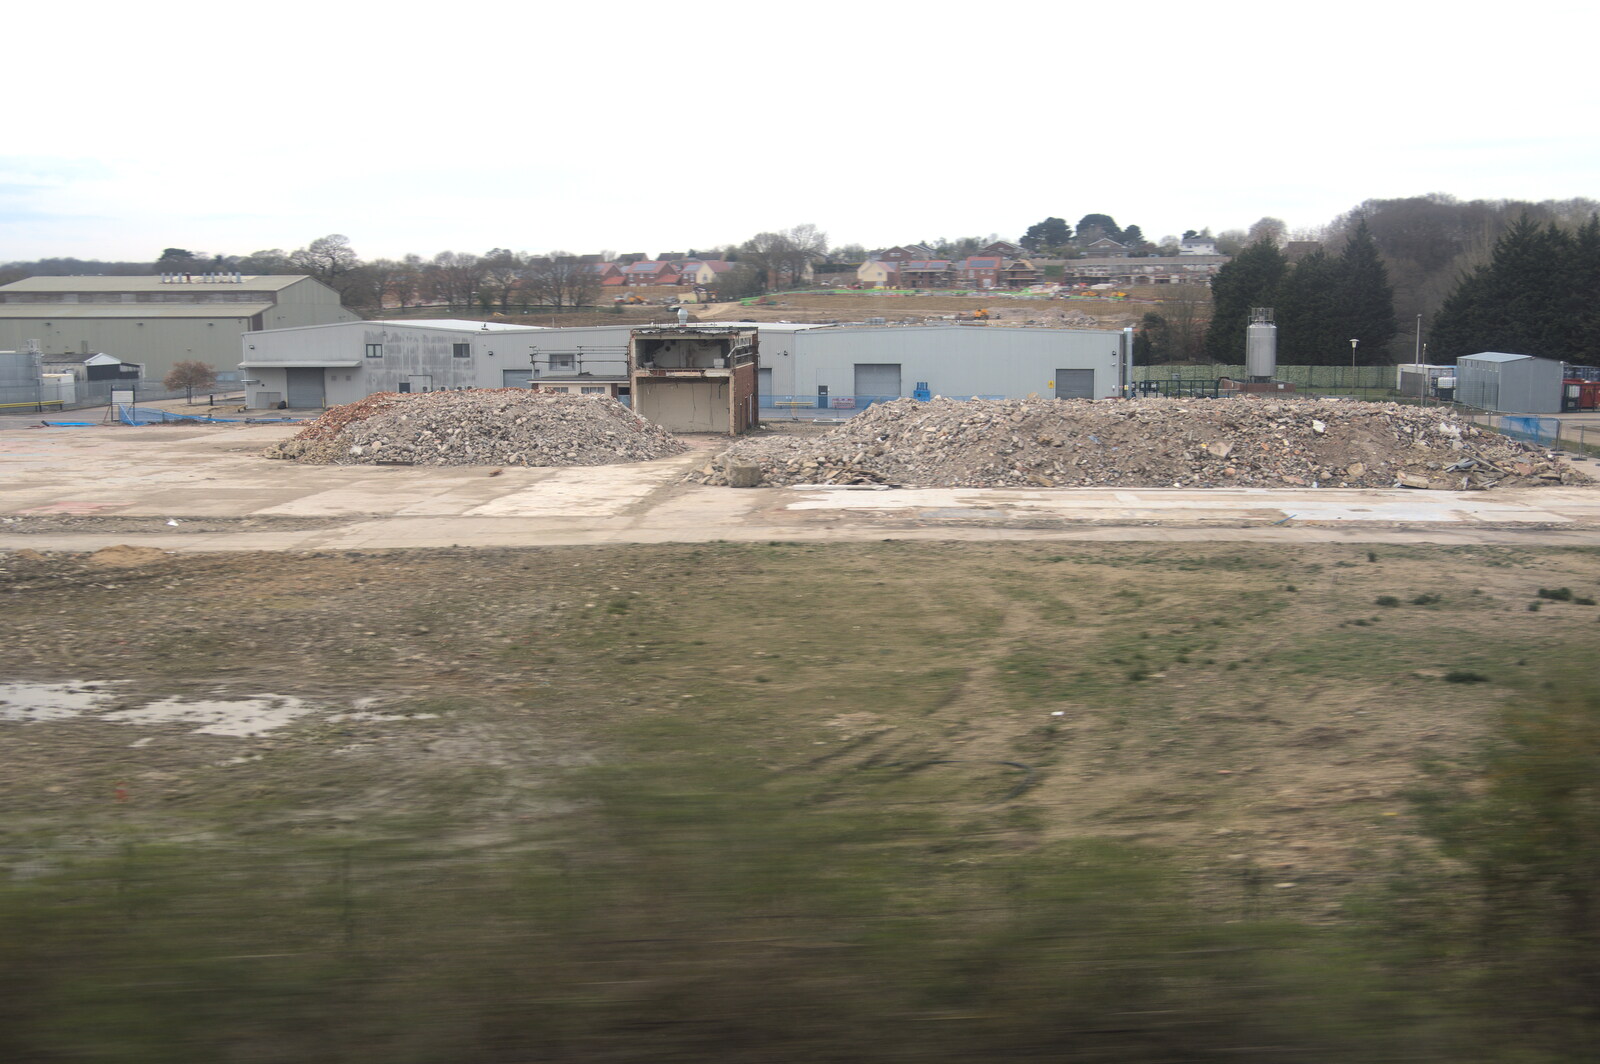 Bernice's Birthday and Walks Around New Milton and Lymington, Hampshire - 10th April 2022: The Xylotol factory at Brantham has nearly gone